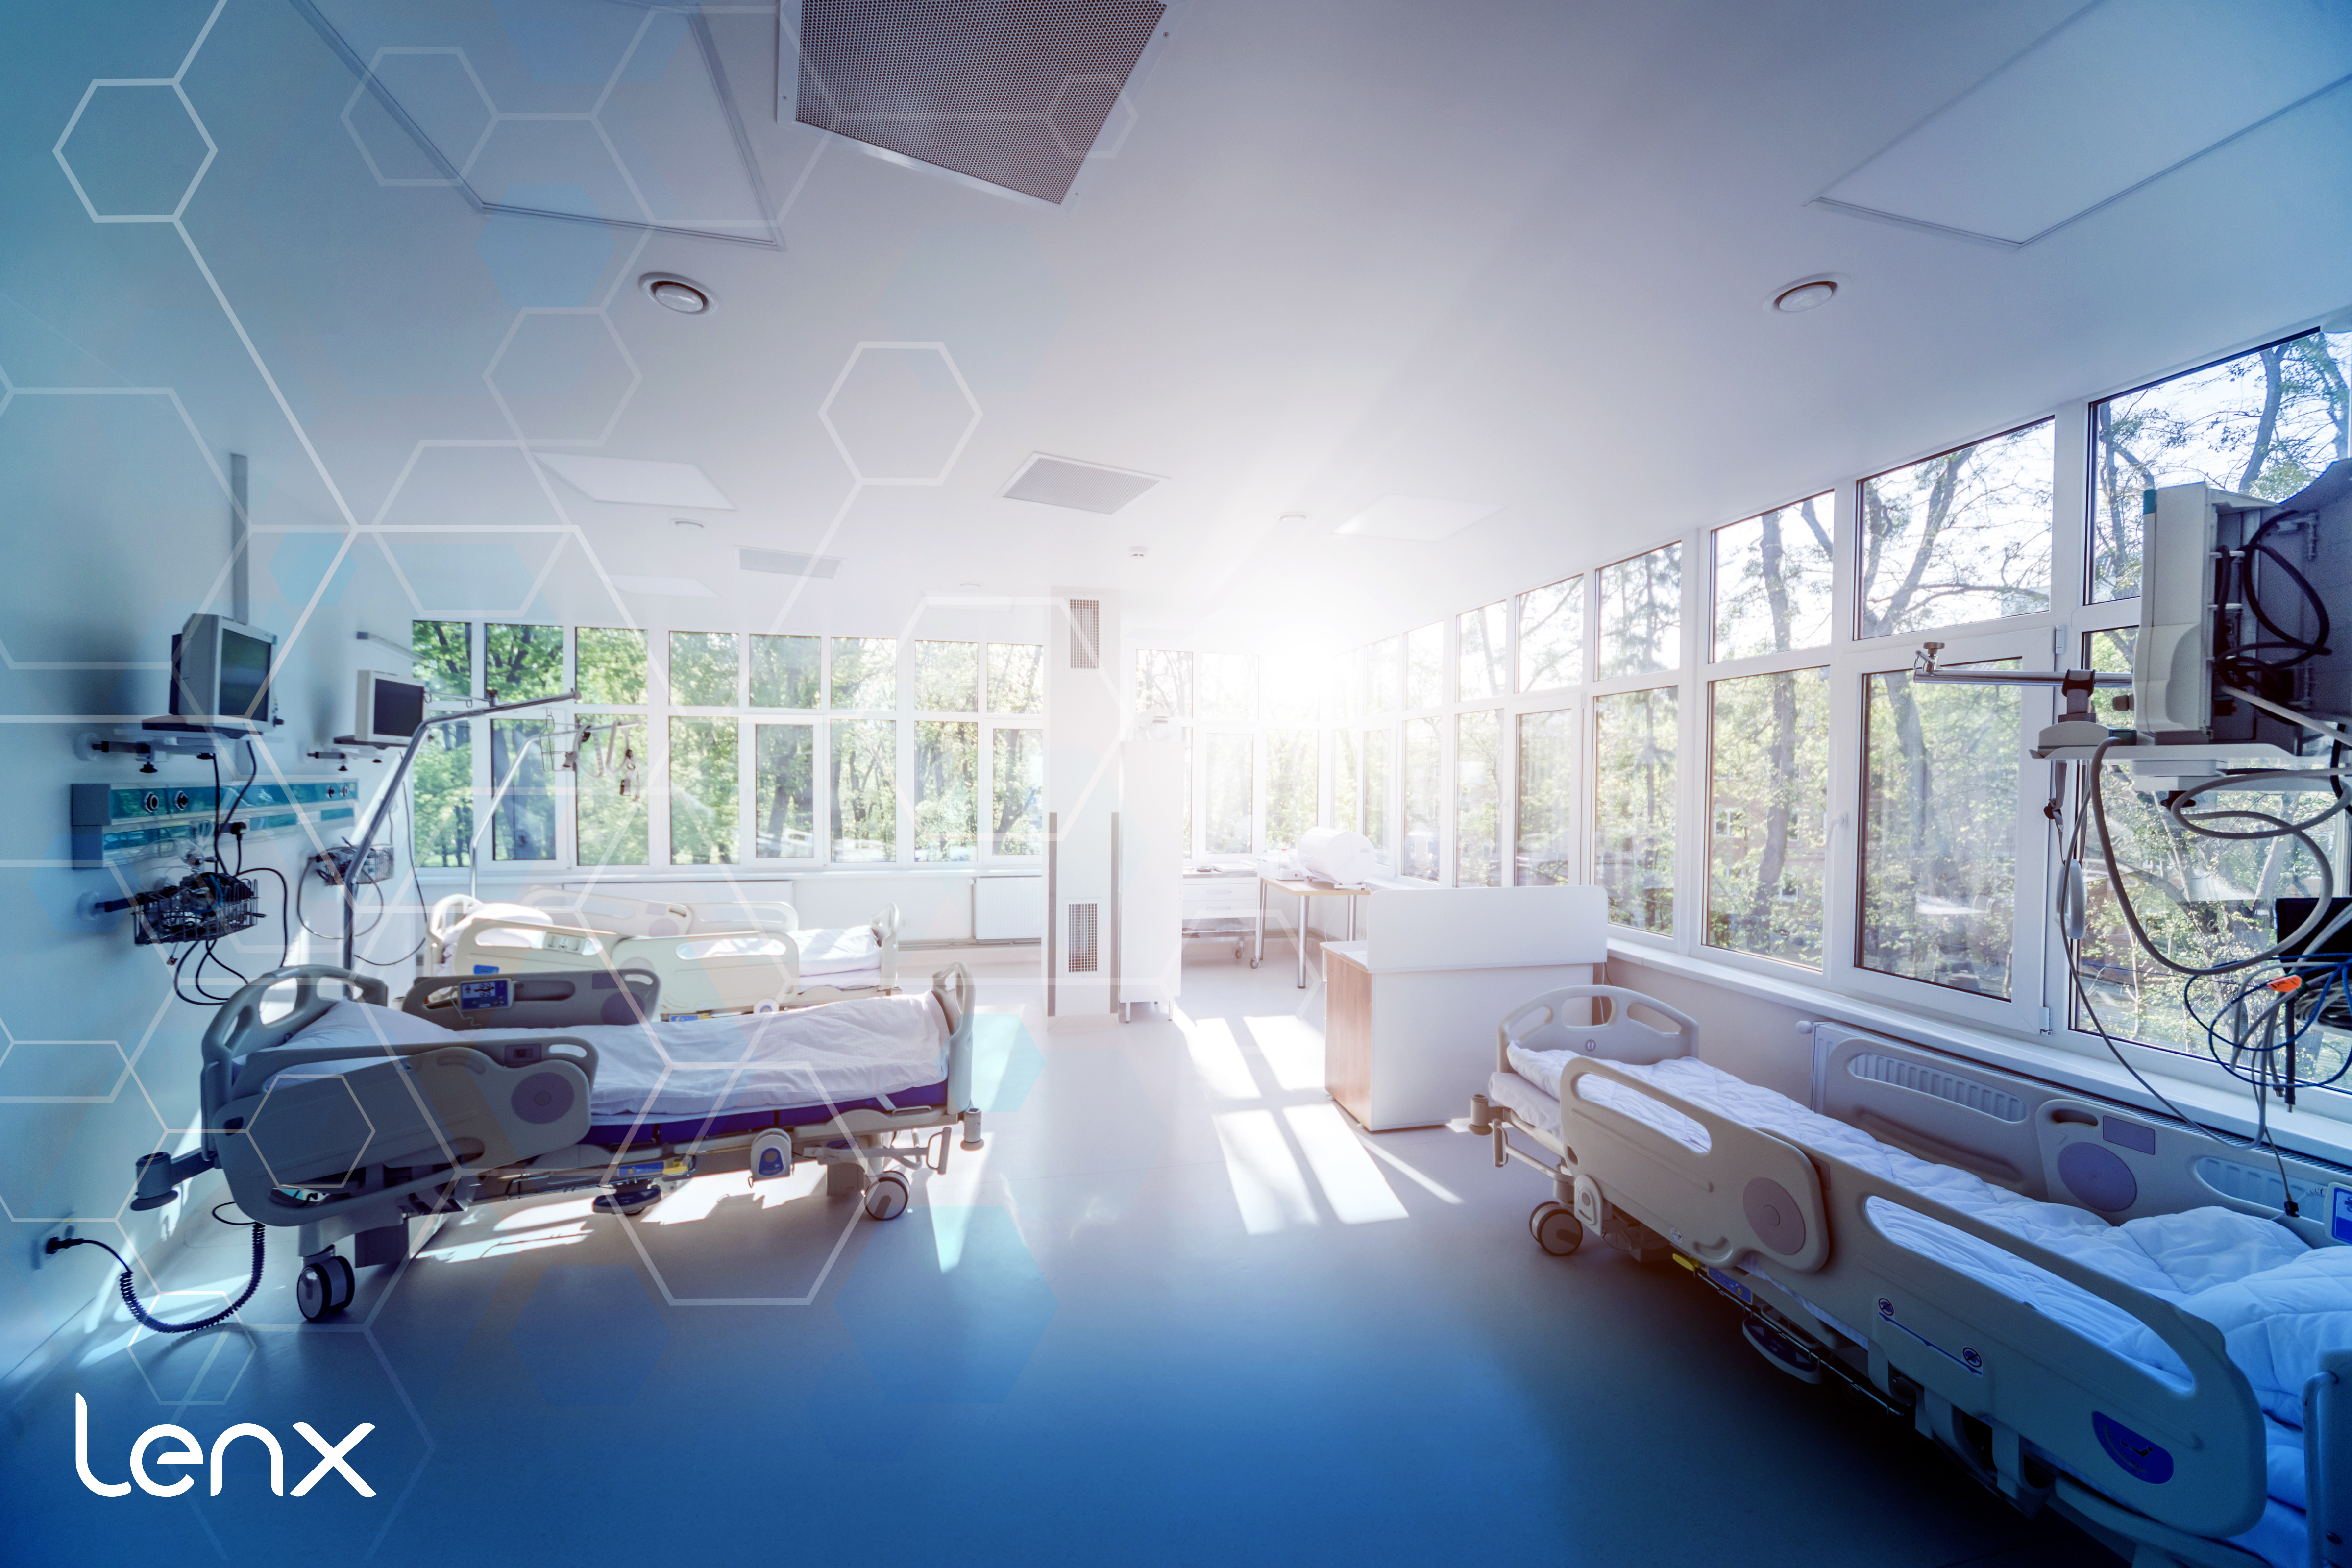 Protecting Hospitals with AI Security and Gun Detection Systems